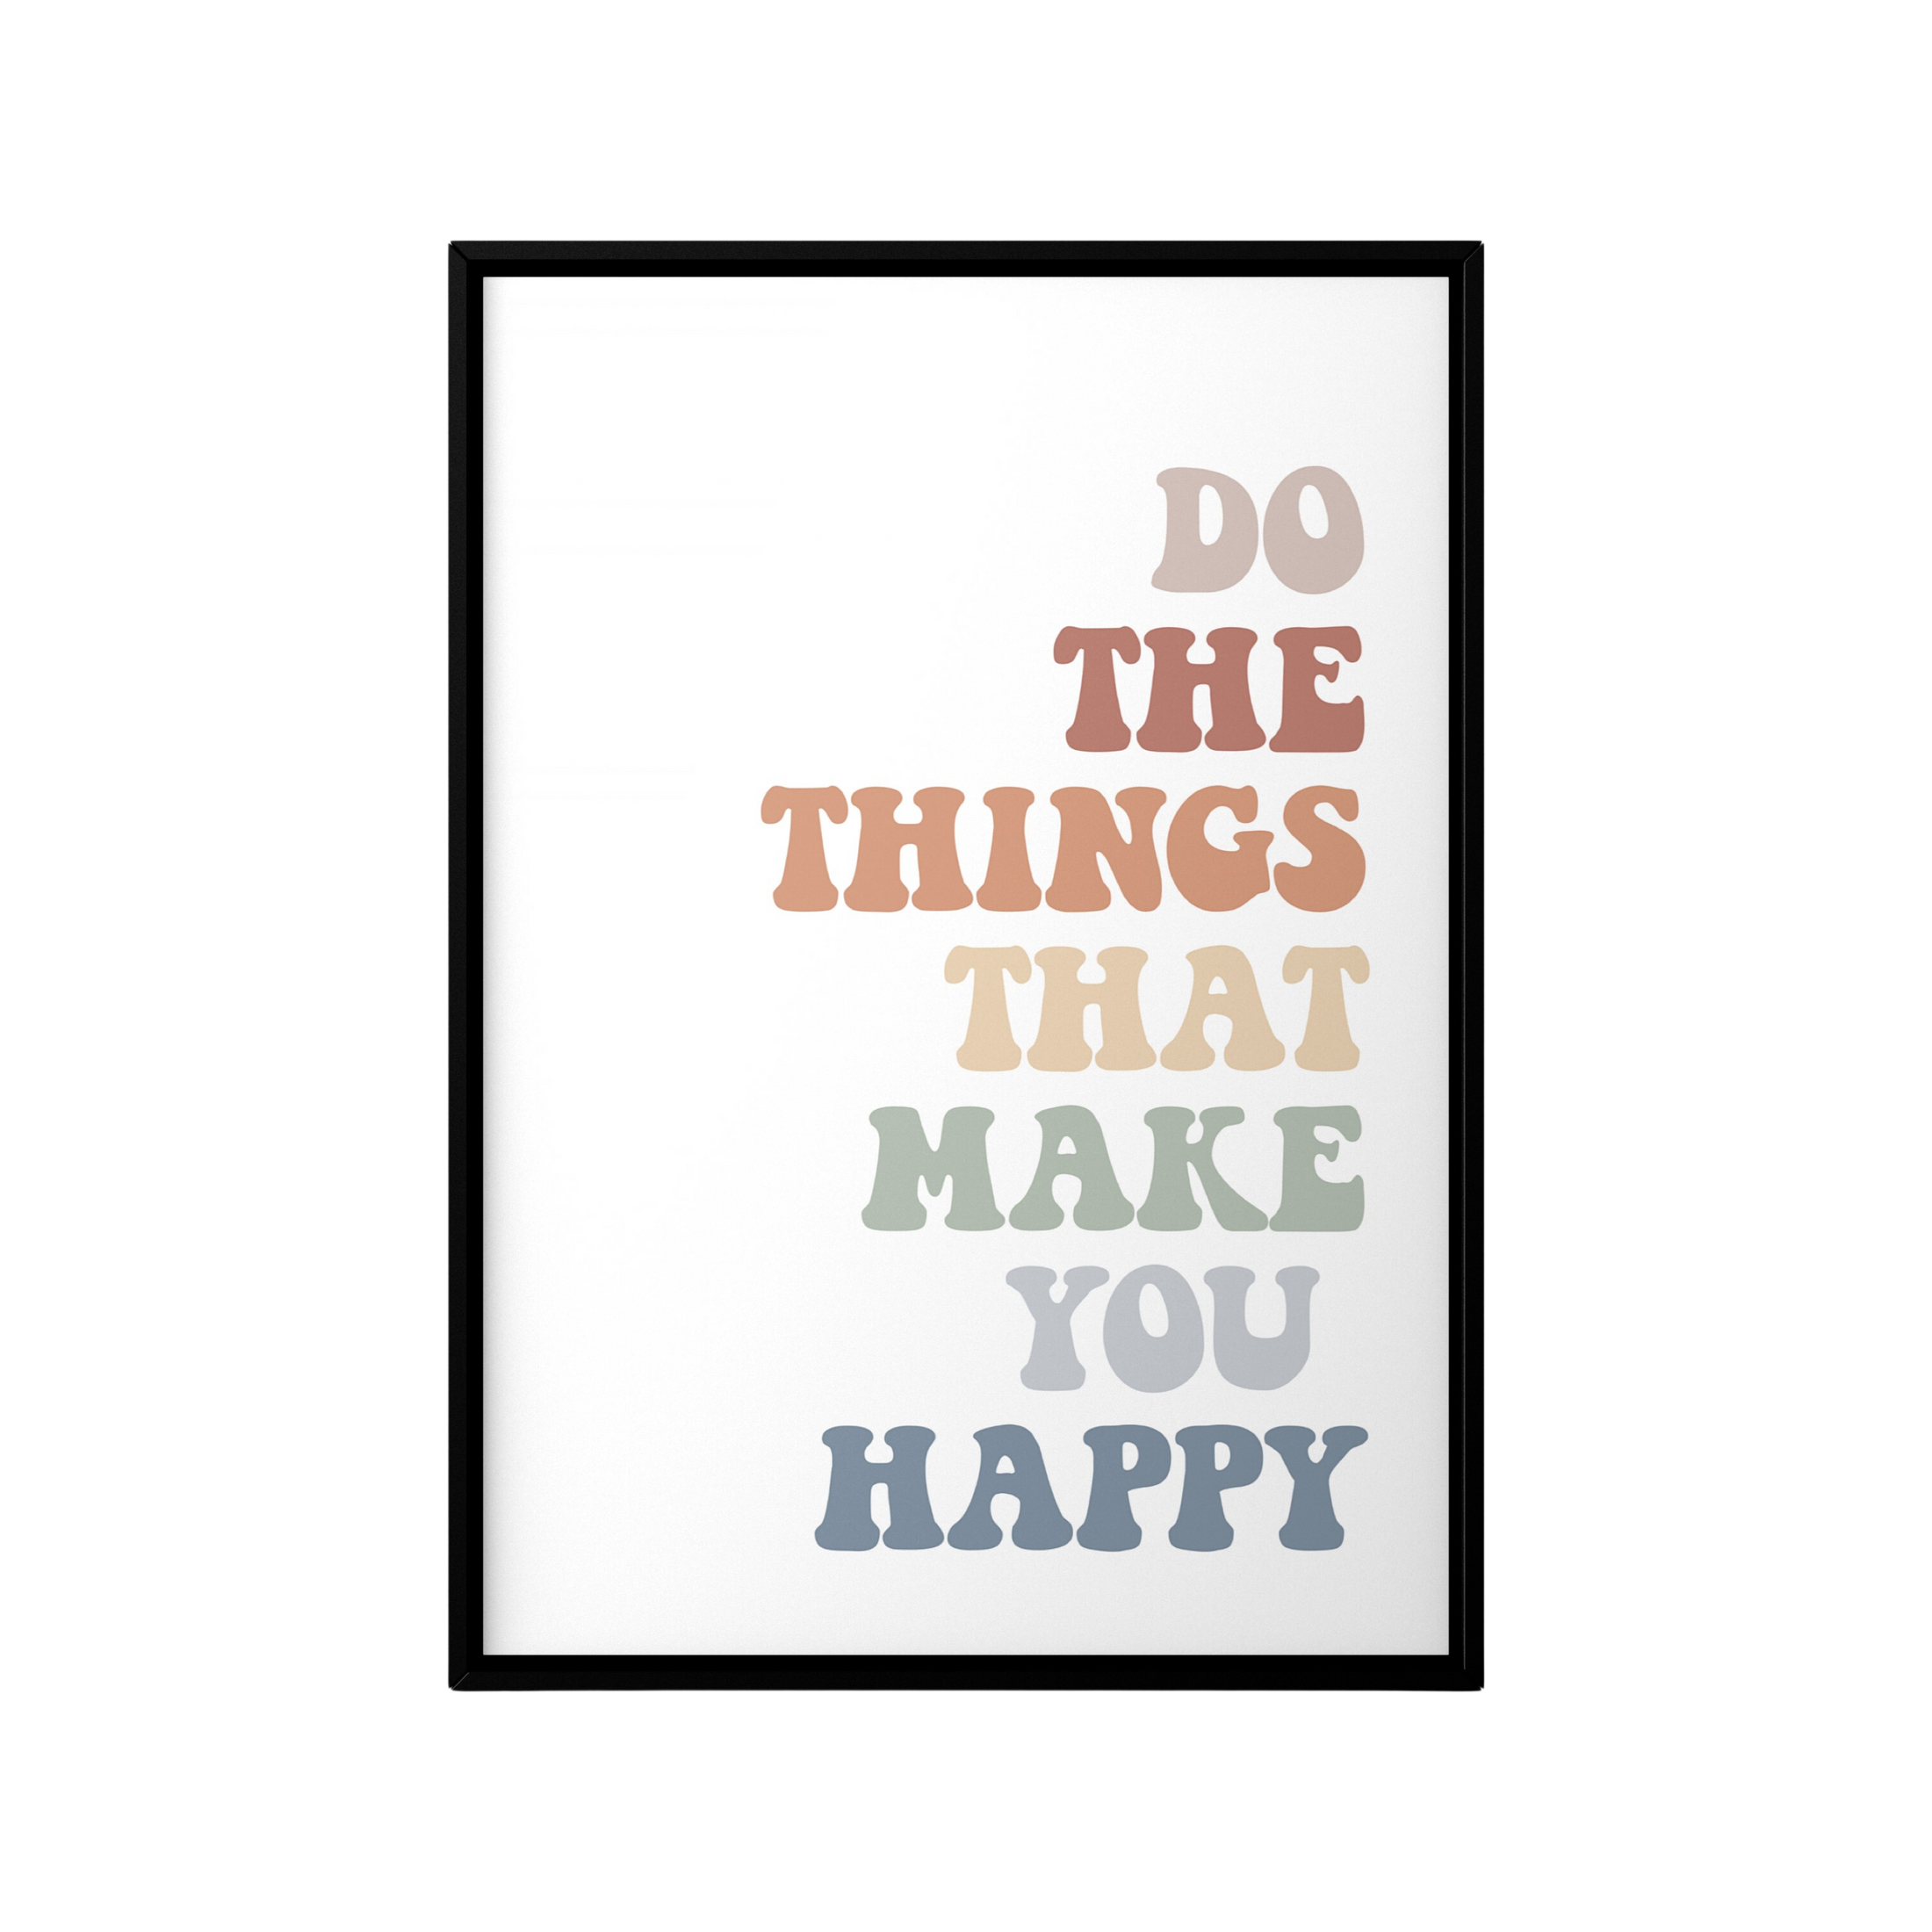 Do the things that make you happy